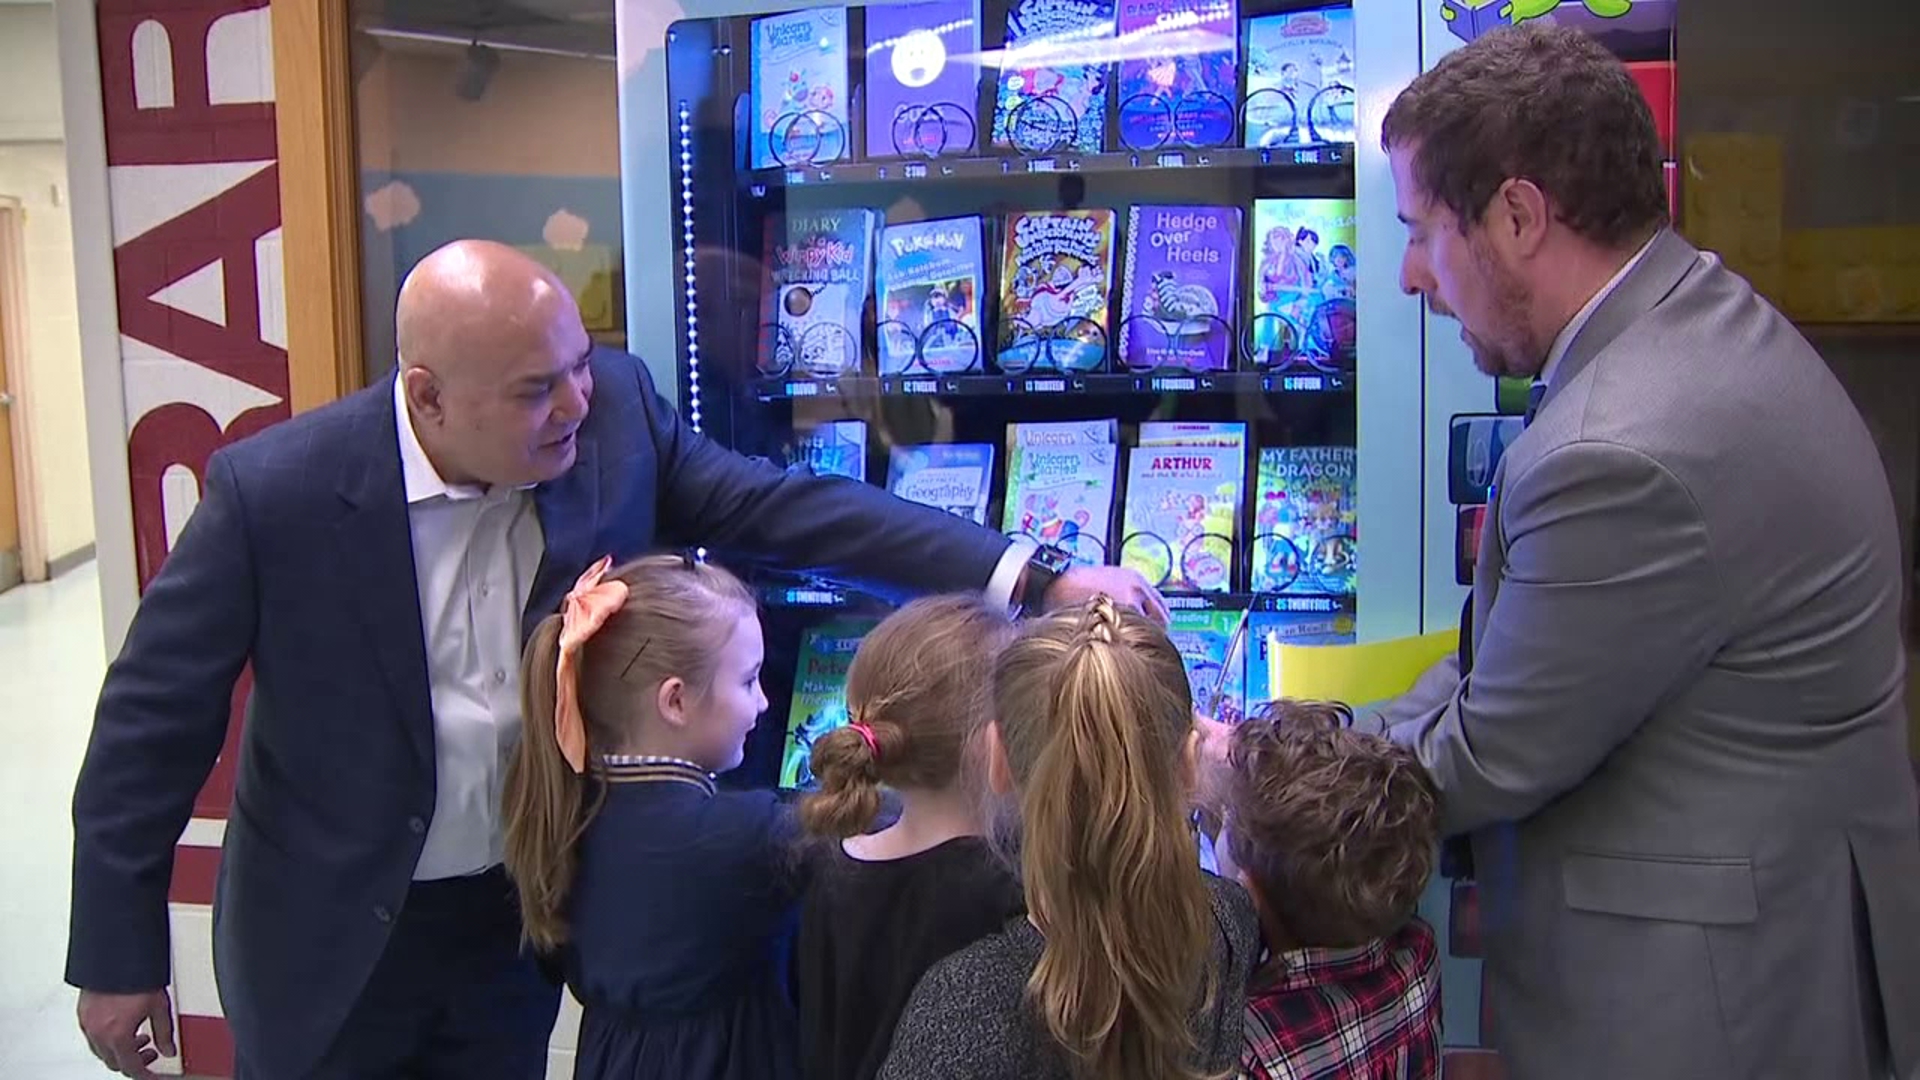 An elementary school in Carbon County is getting books into the hands of students in a fun, high-tech way.